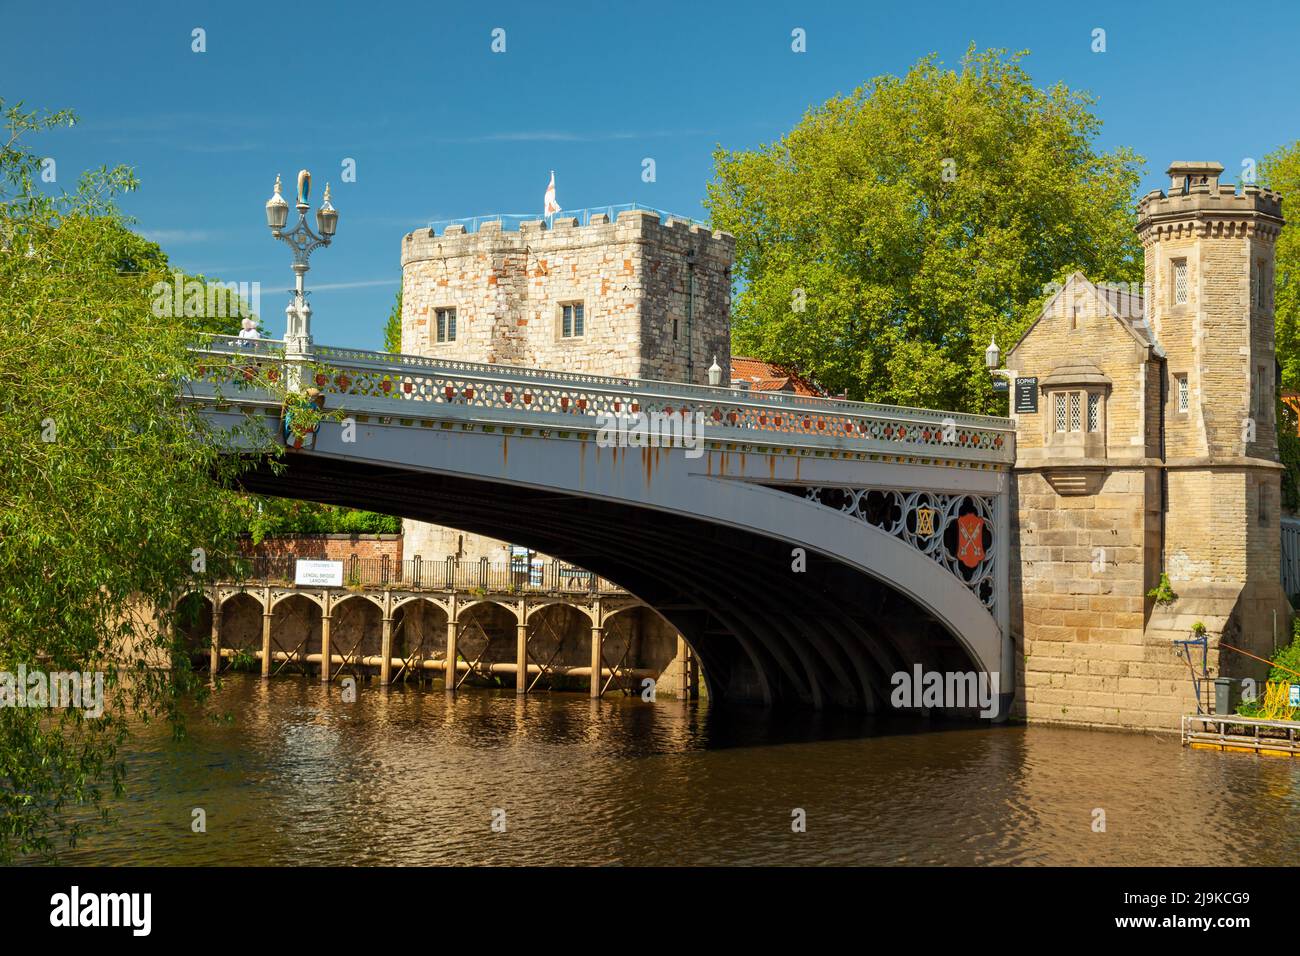 Spring afternoon at Lendal Bridge over river Ouse in York, England. Stock Photo